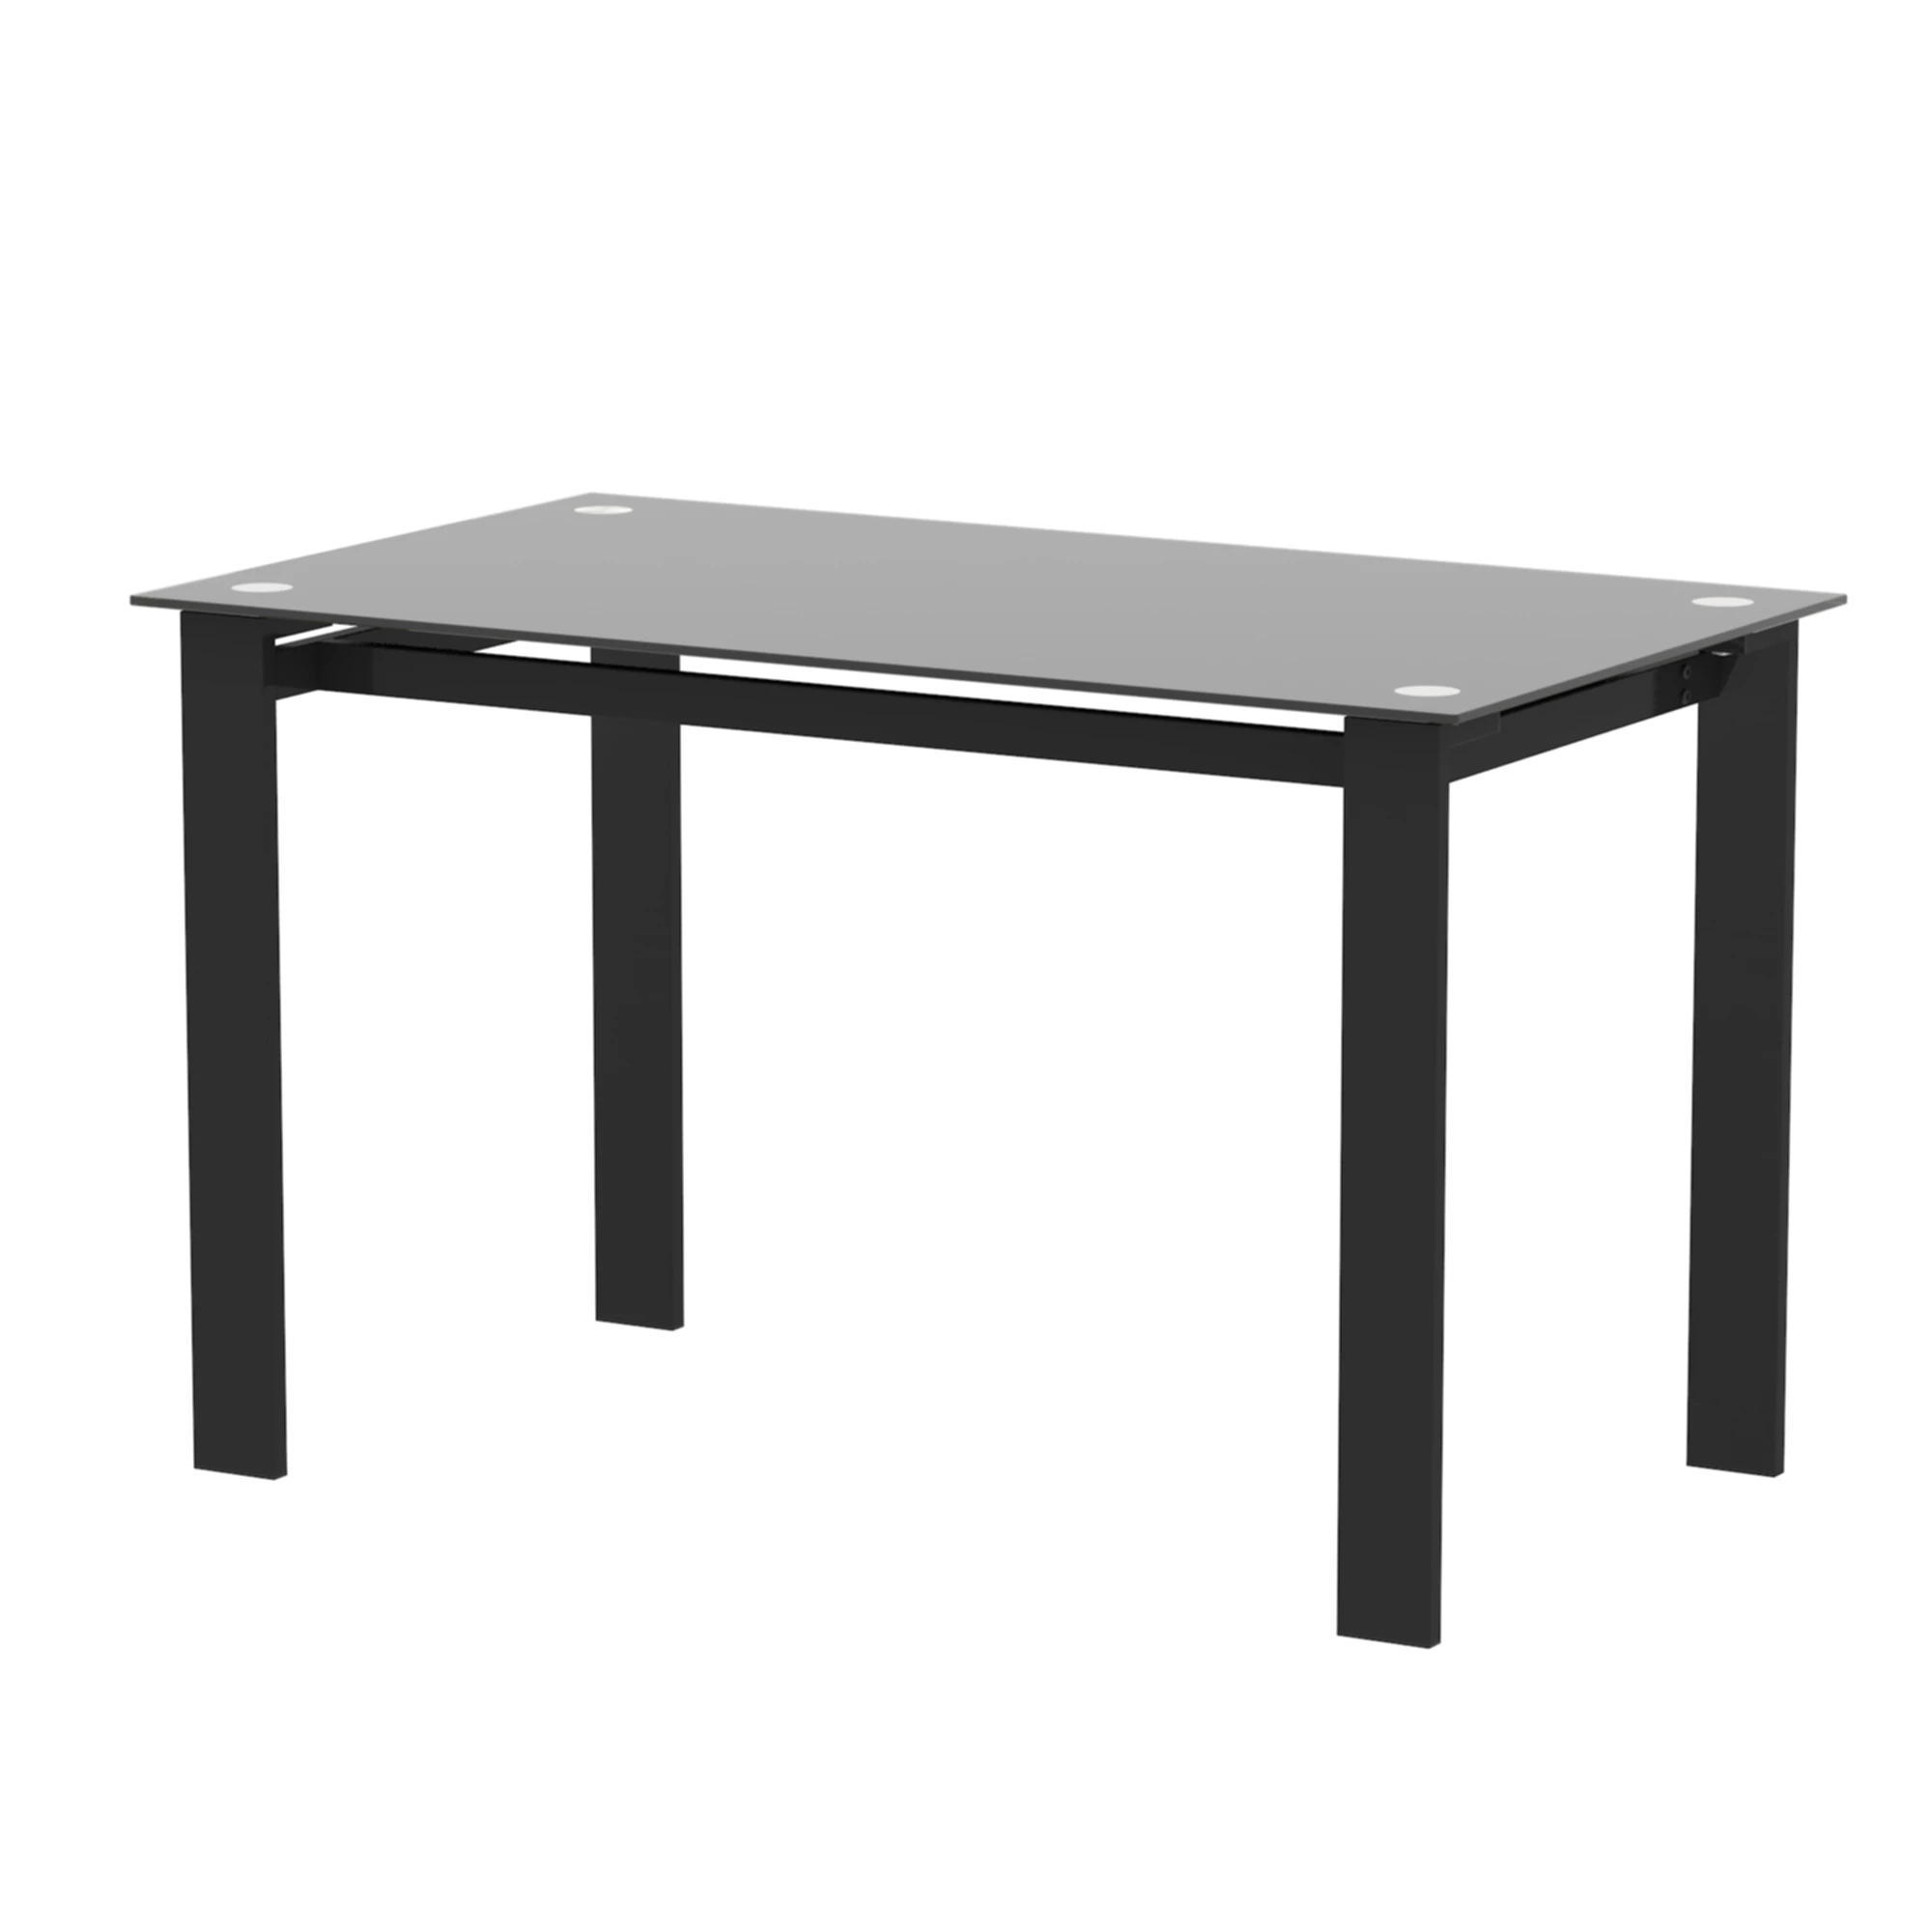 Dining Table Simple Rectangular Metal Table Legs Black For L